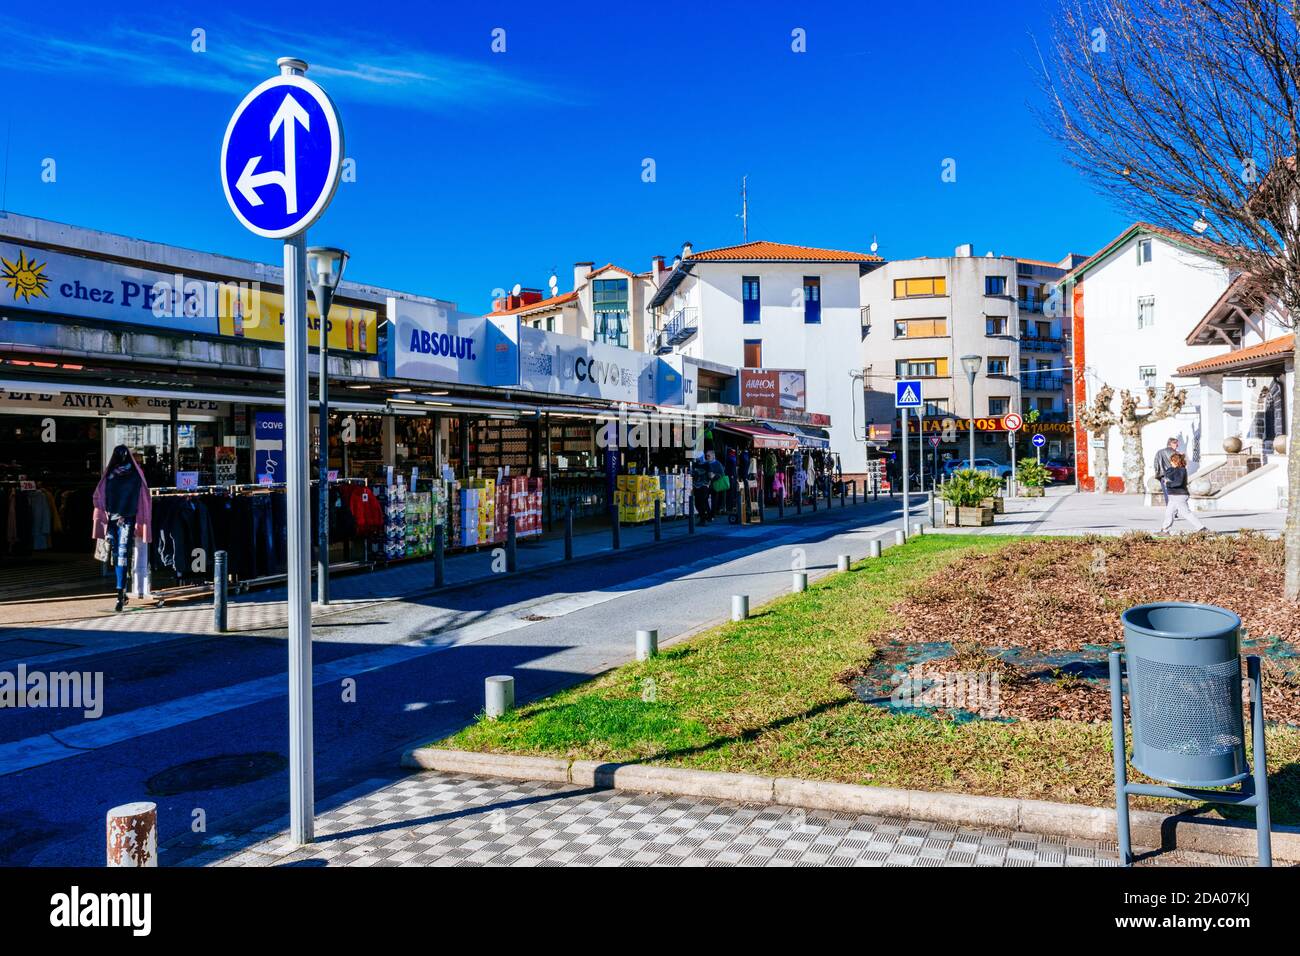 Commercial area in the district of Behobia that takes advantage of price differences between countries to offer cheaper goods. Irun, Gipuzkoa, Donosti Stock Photo